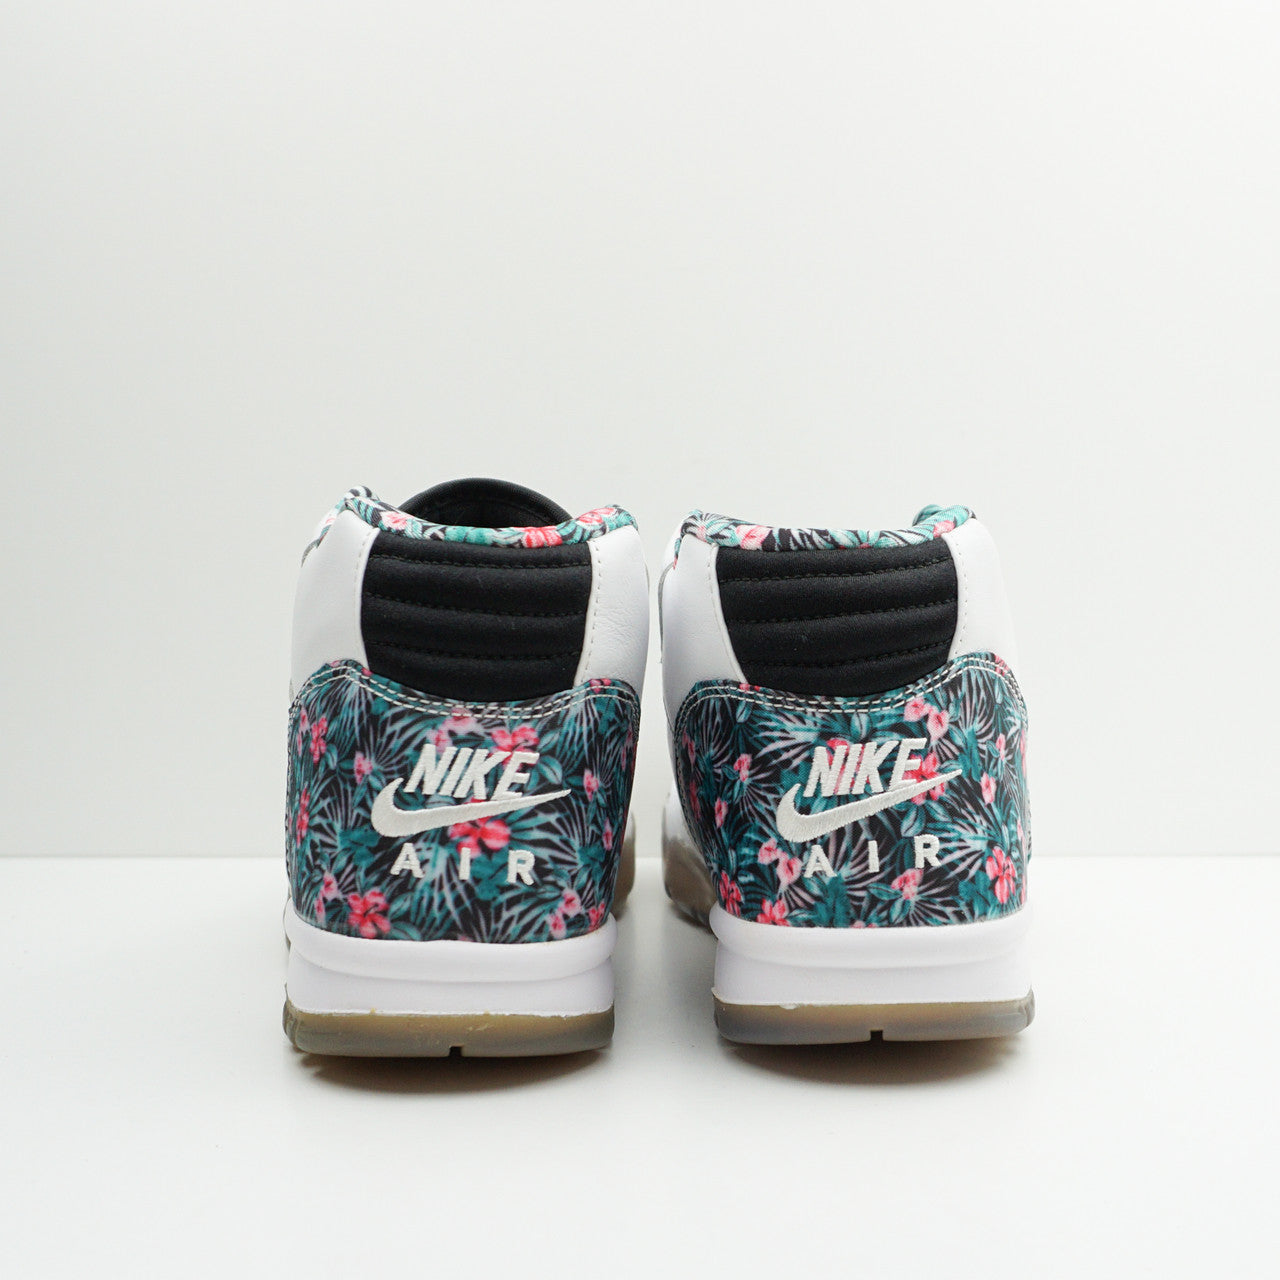 Nike Air Trainer 1 Pro Bowl